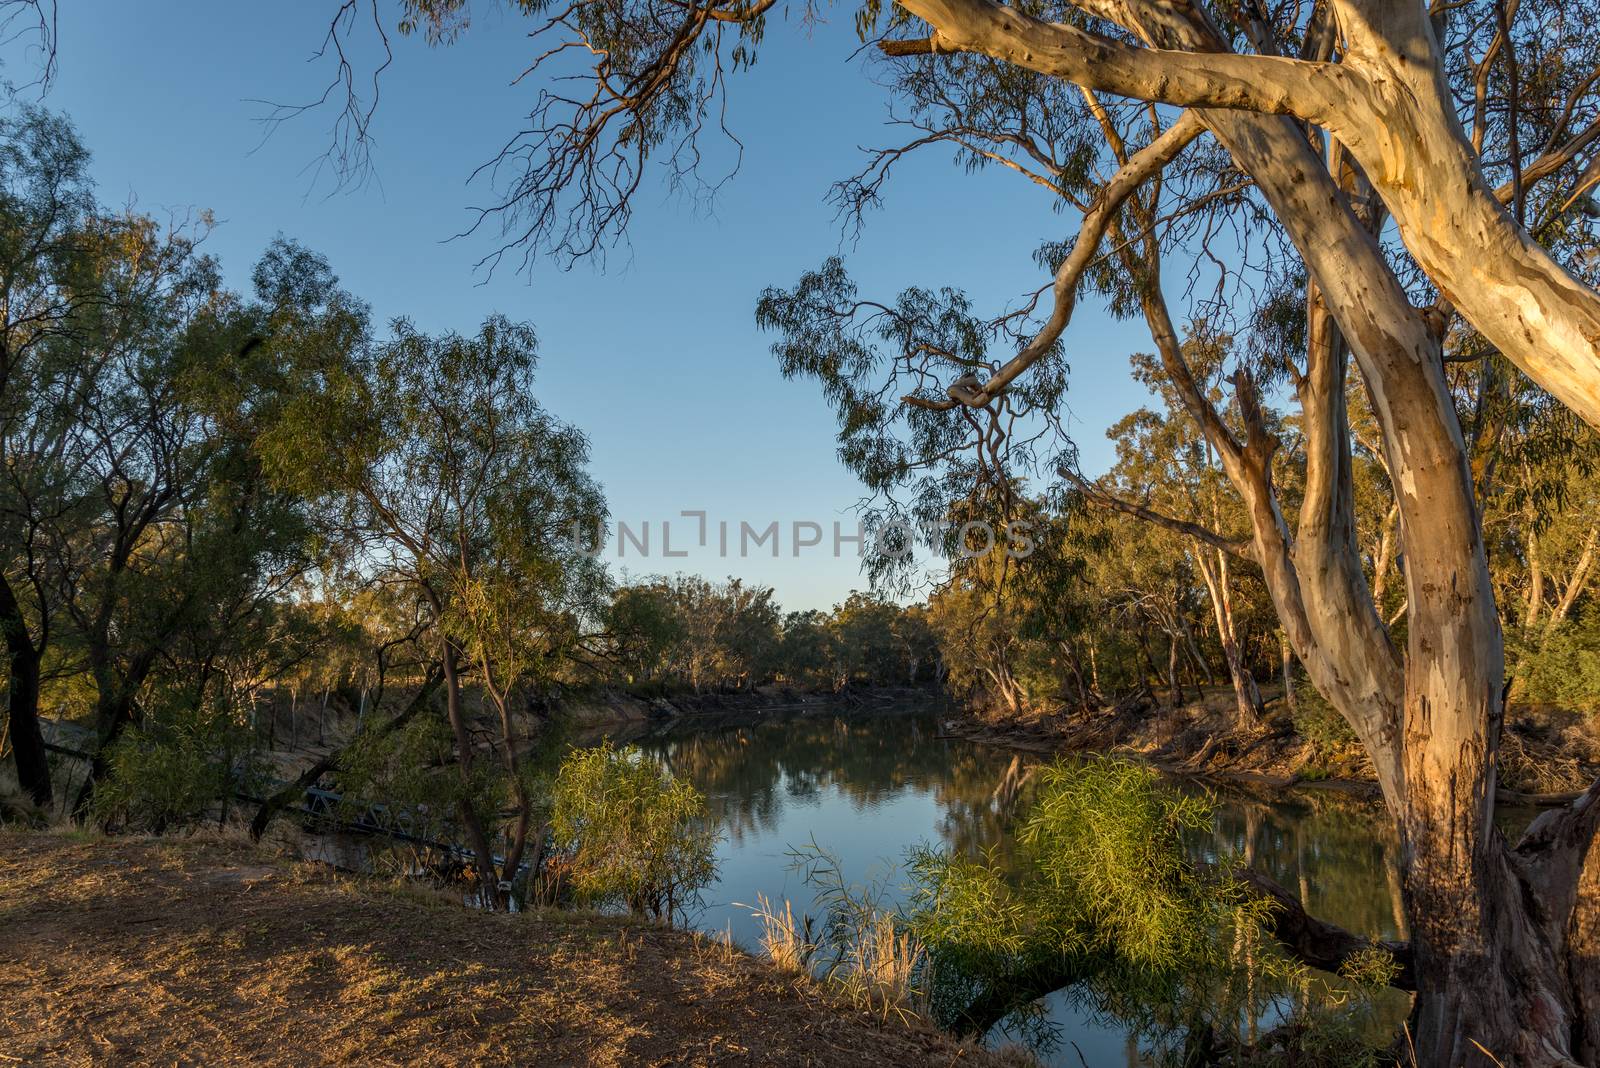 Murray river early in the morning with river gum trees on both banks